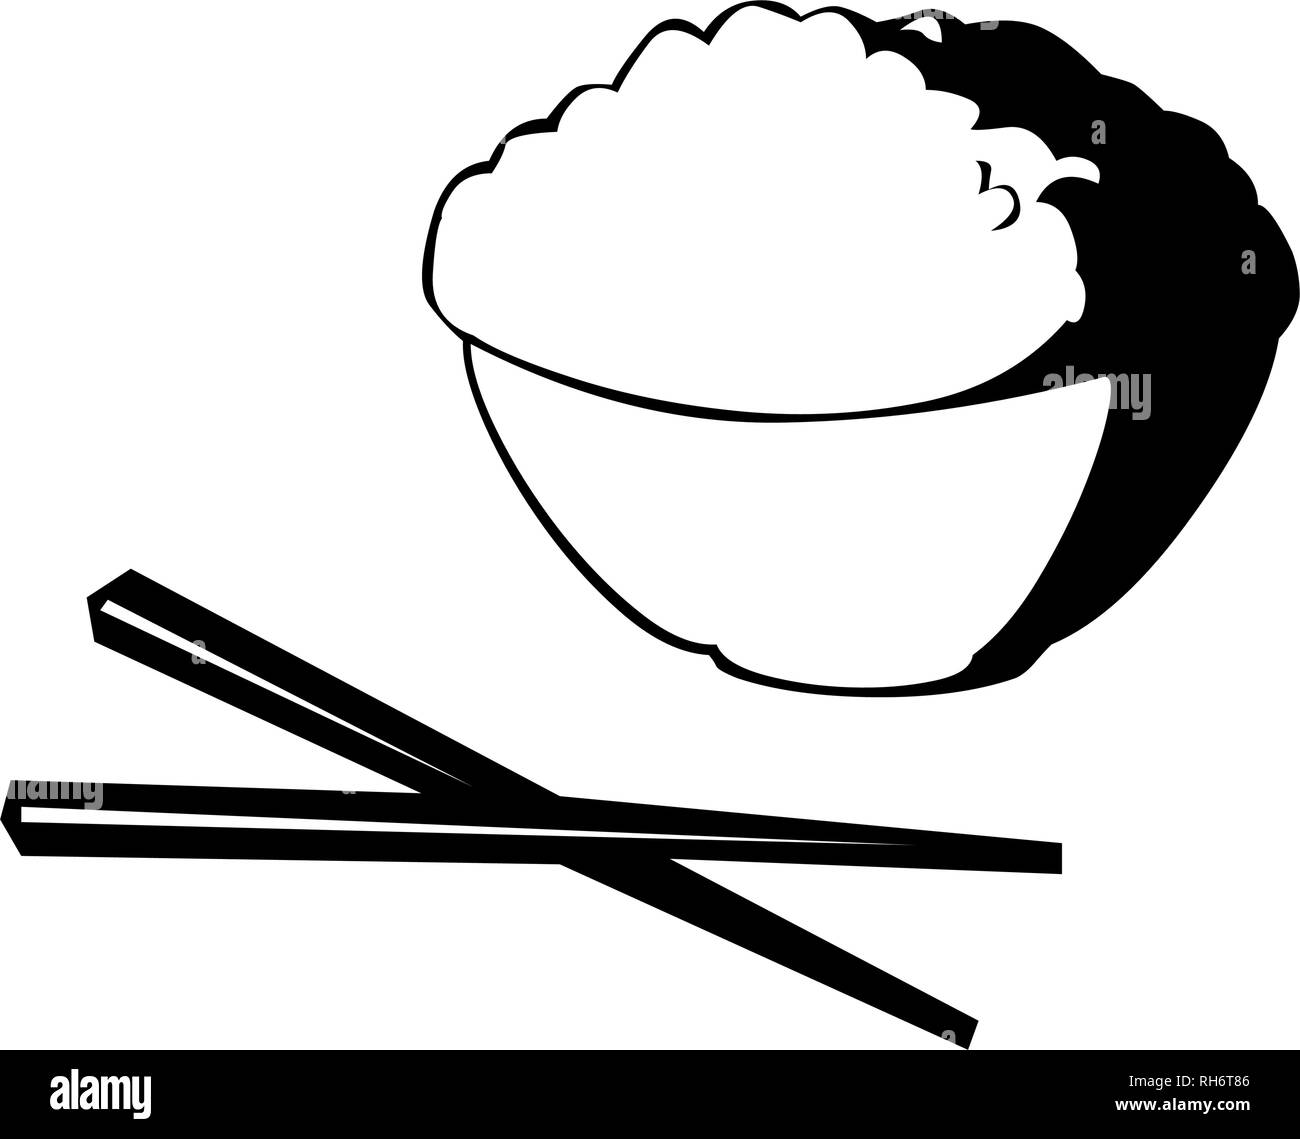 Chinese cuisine food meal chopsticks vector icon Stock Vector